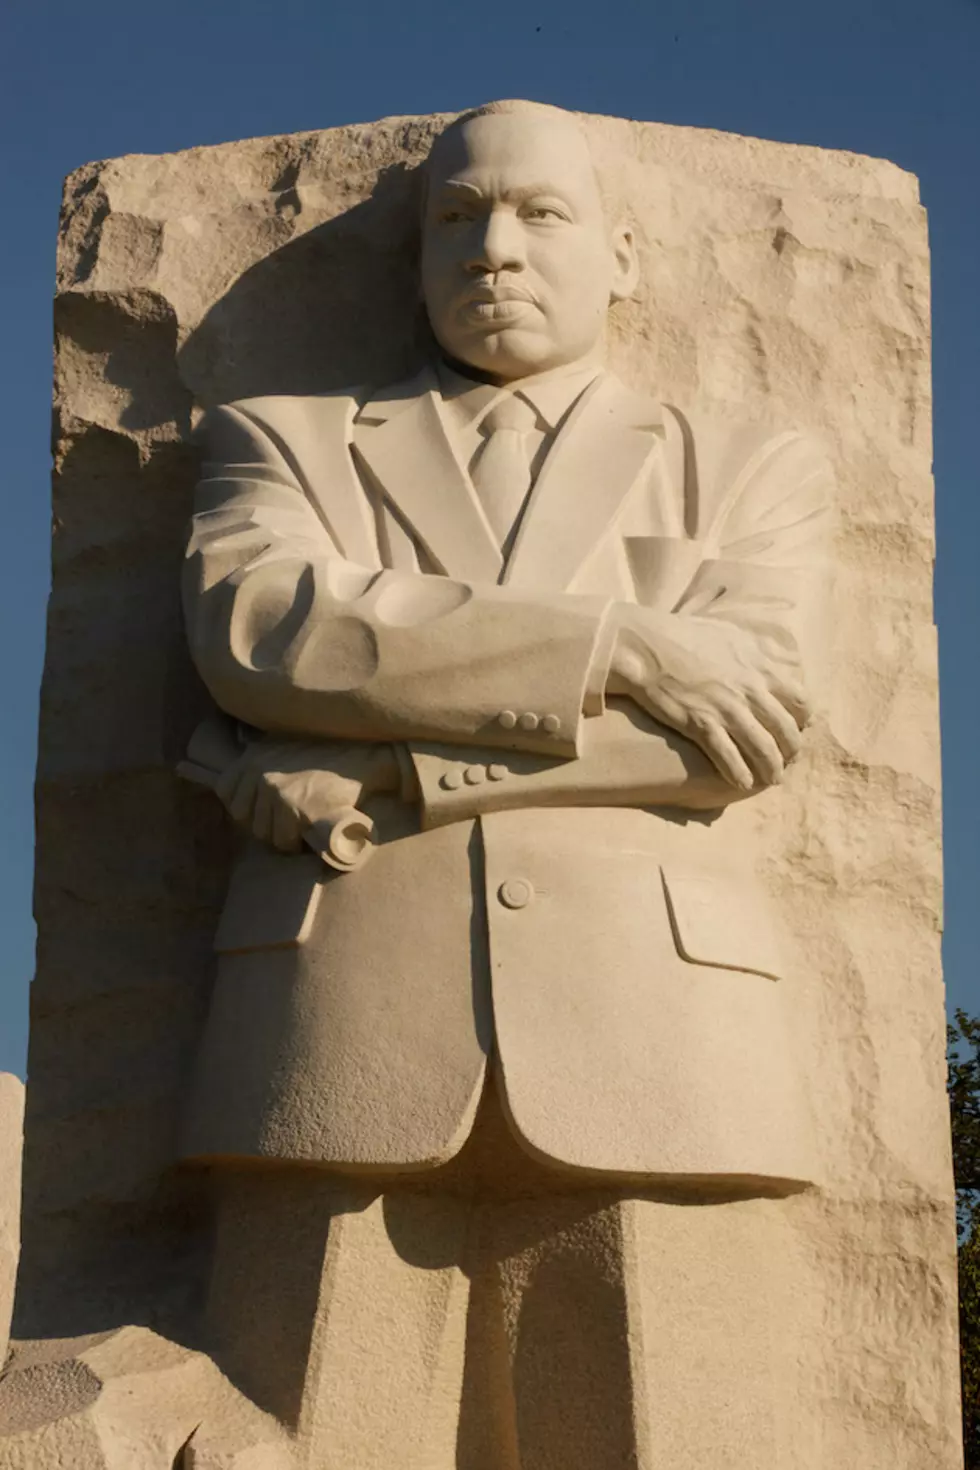 10 Quotes From Dr. Martin Luther King, Jr.